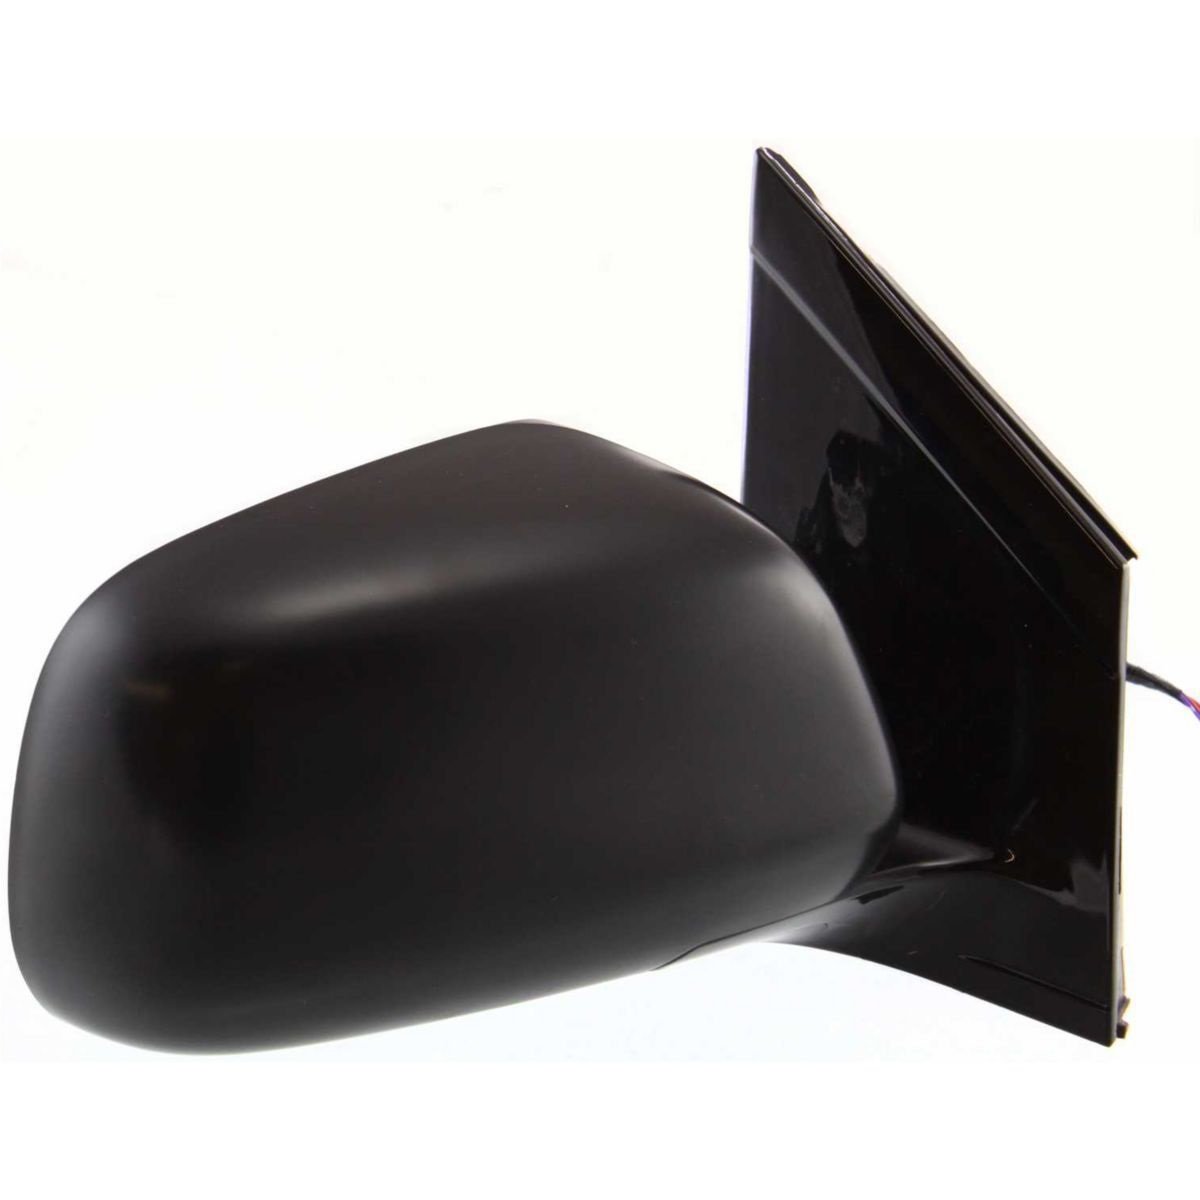 2005 Lexus RX330 : Side View Mirror Painted